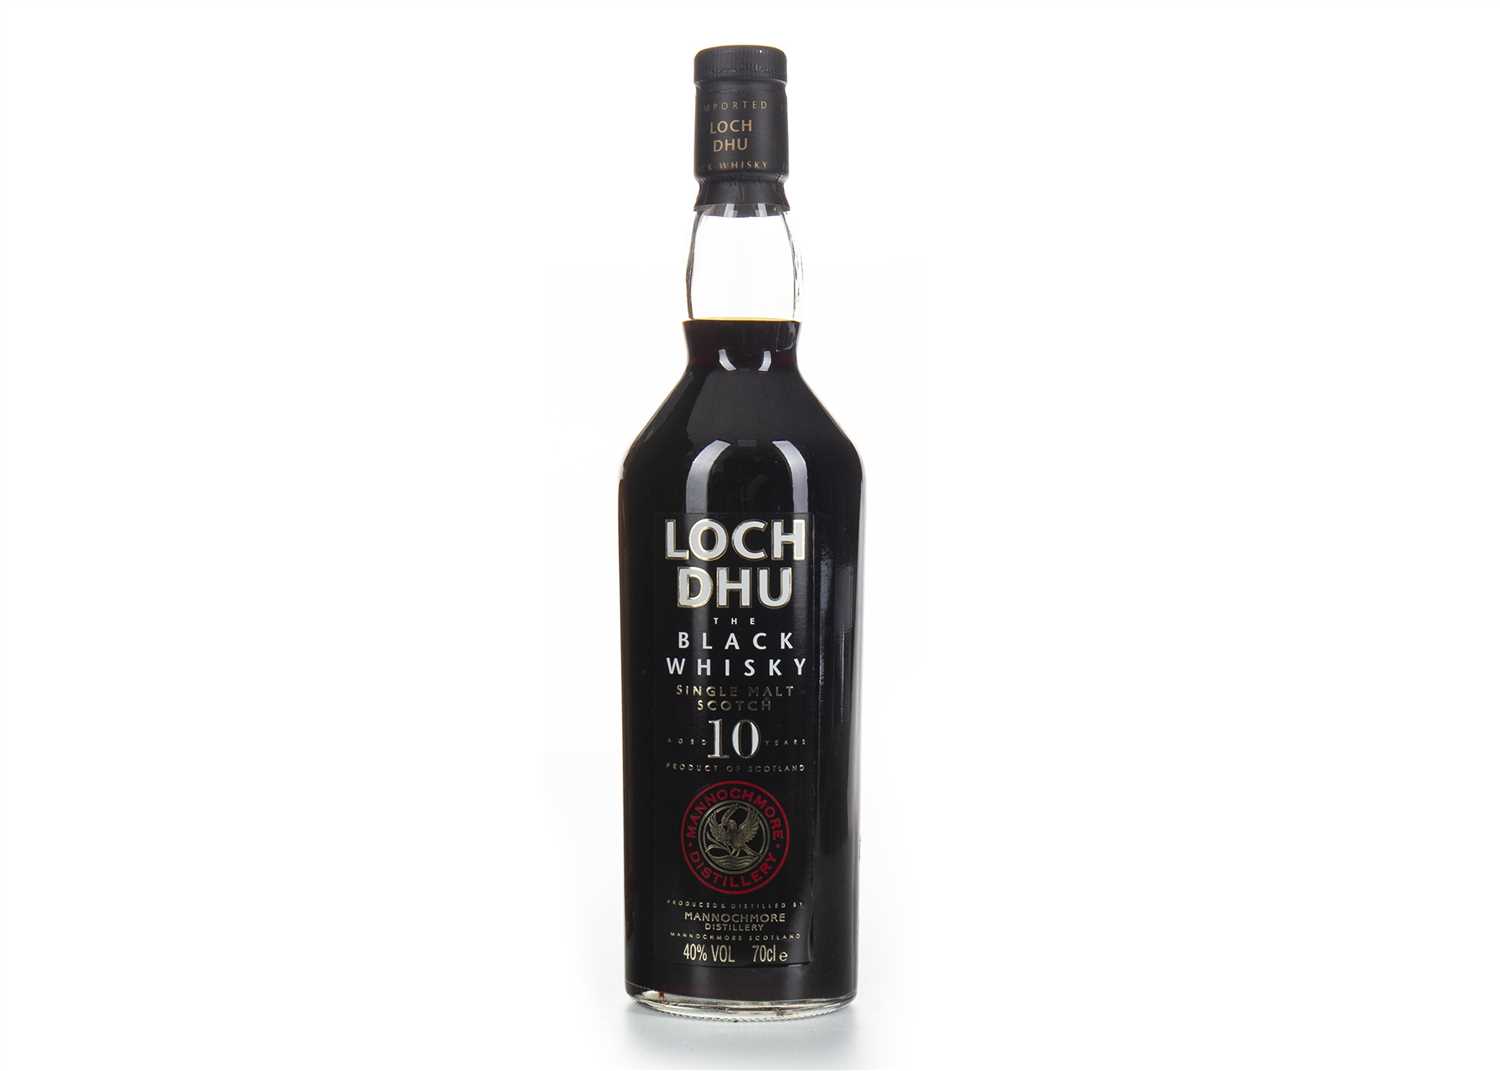 Lot 176 - LOCH DHU 'THE BLACK WHISKY' AGED 10 YEARS